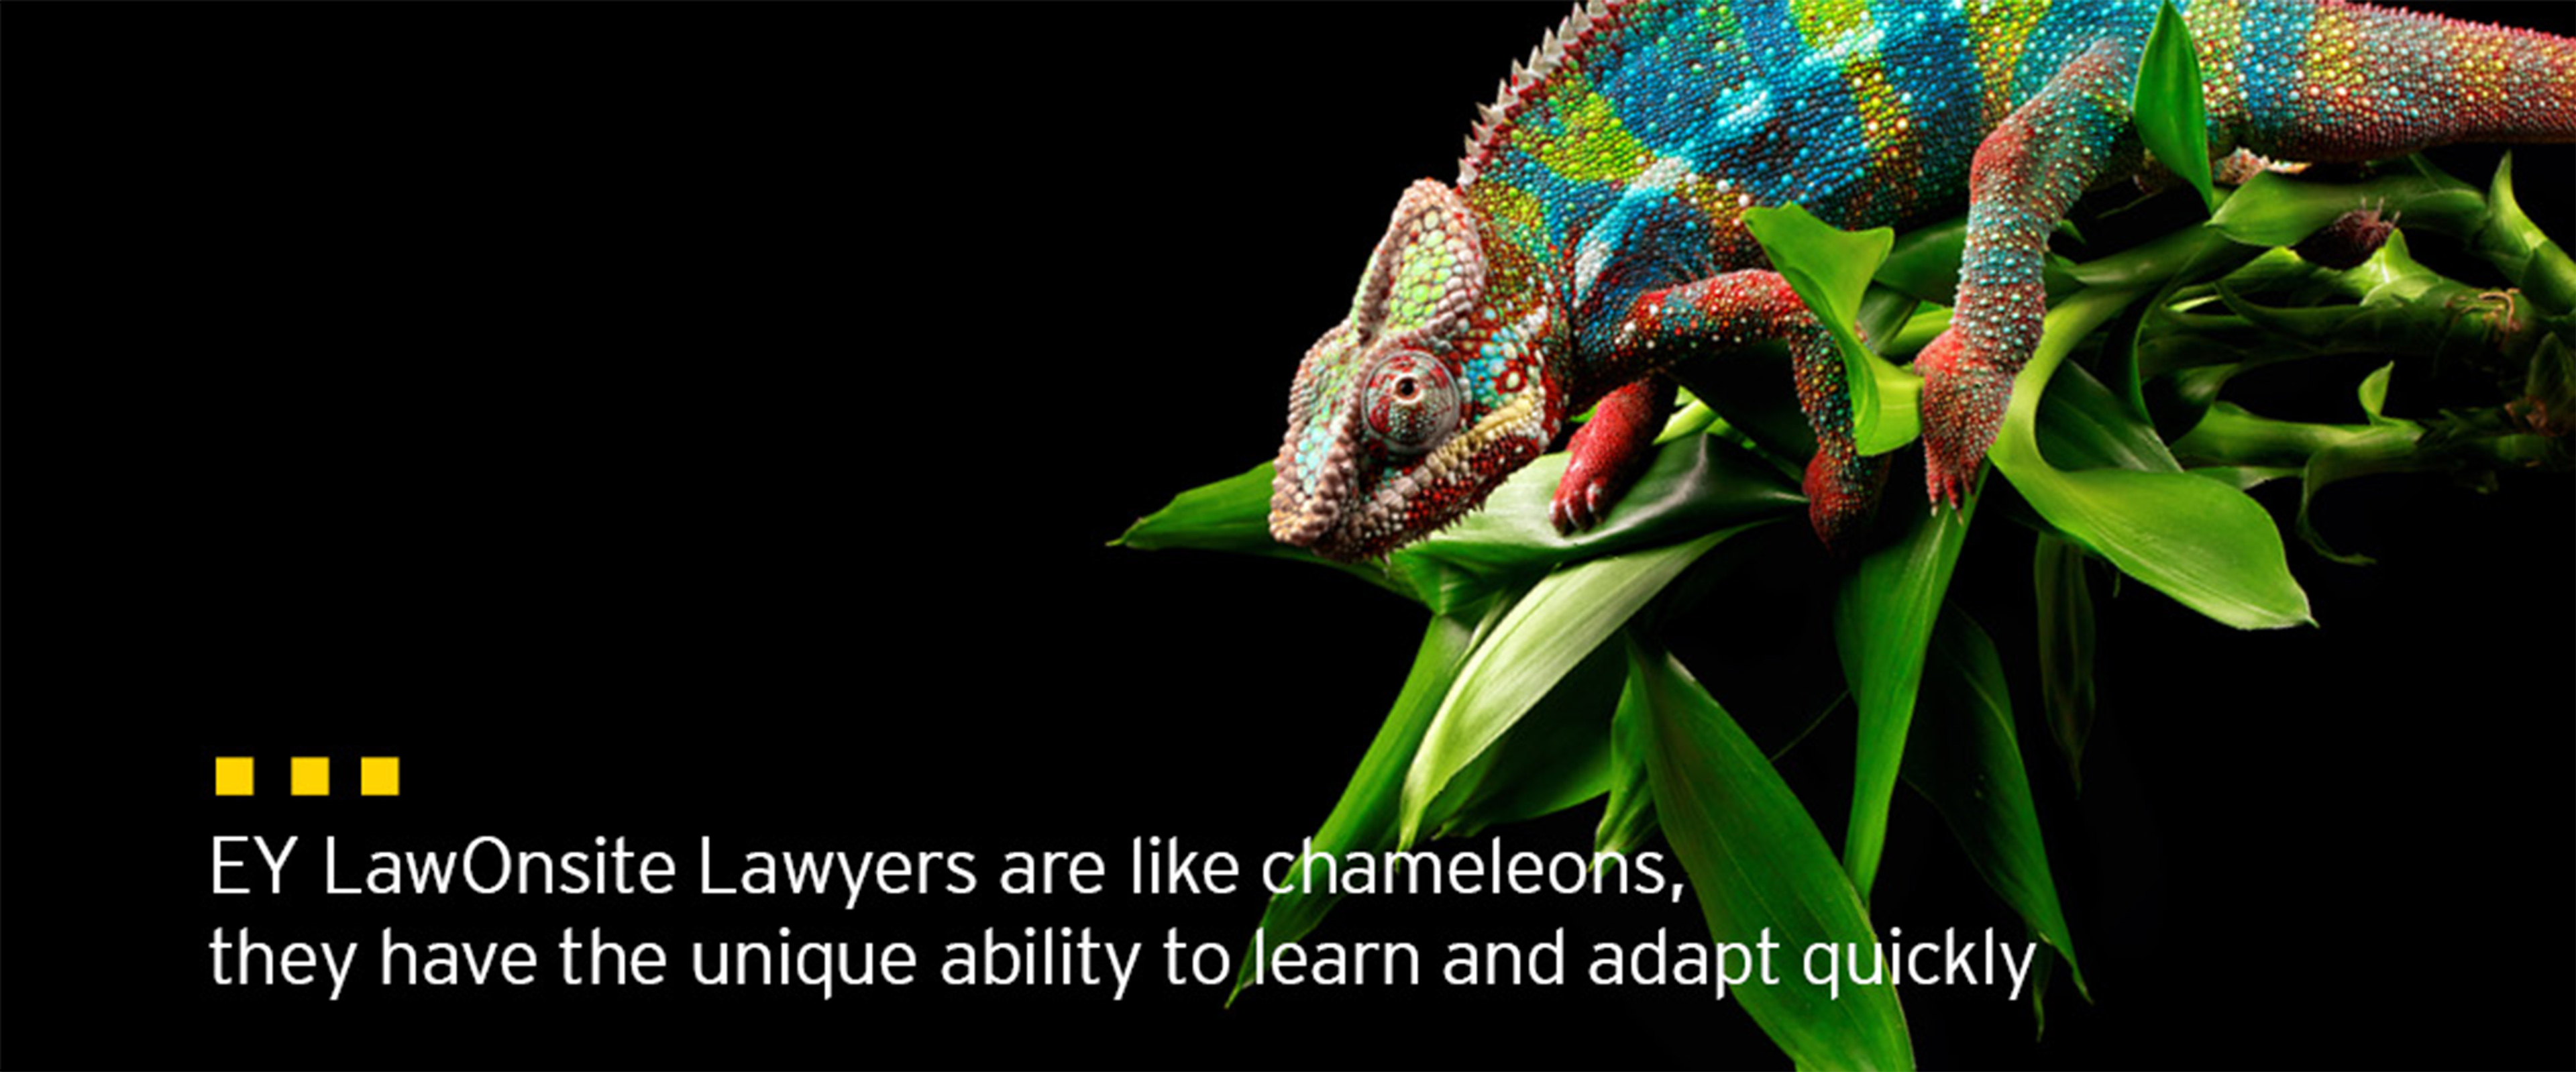 Image with chameleon